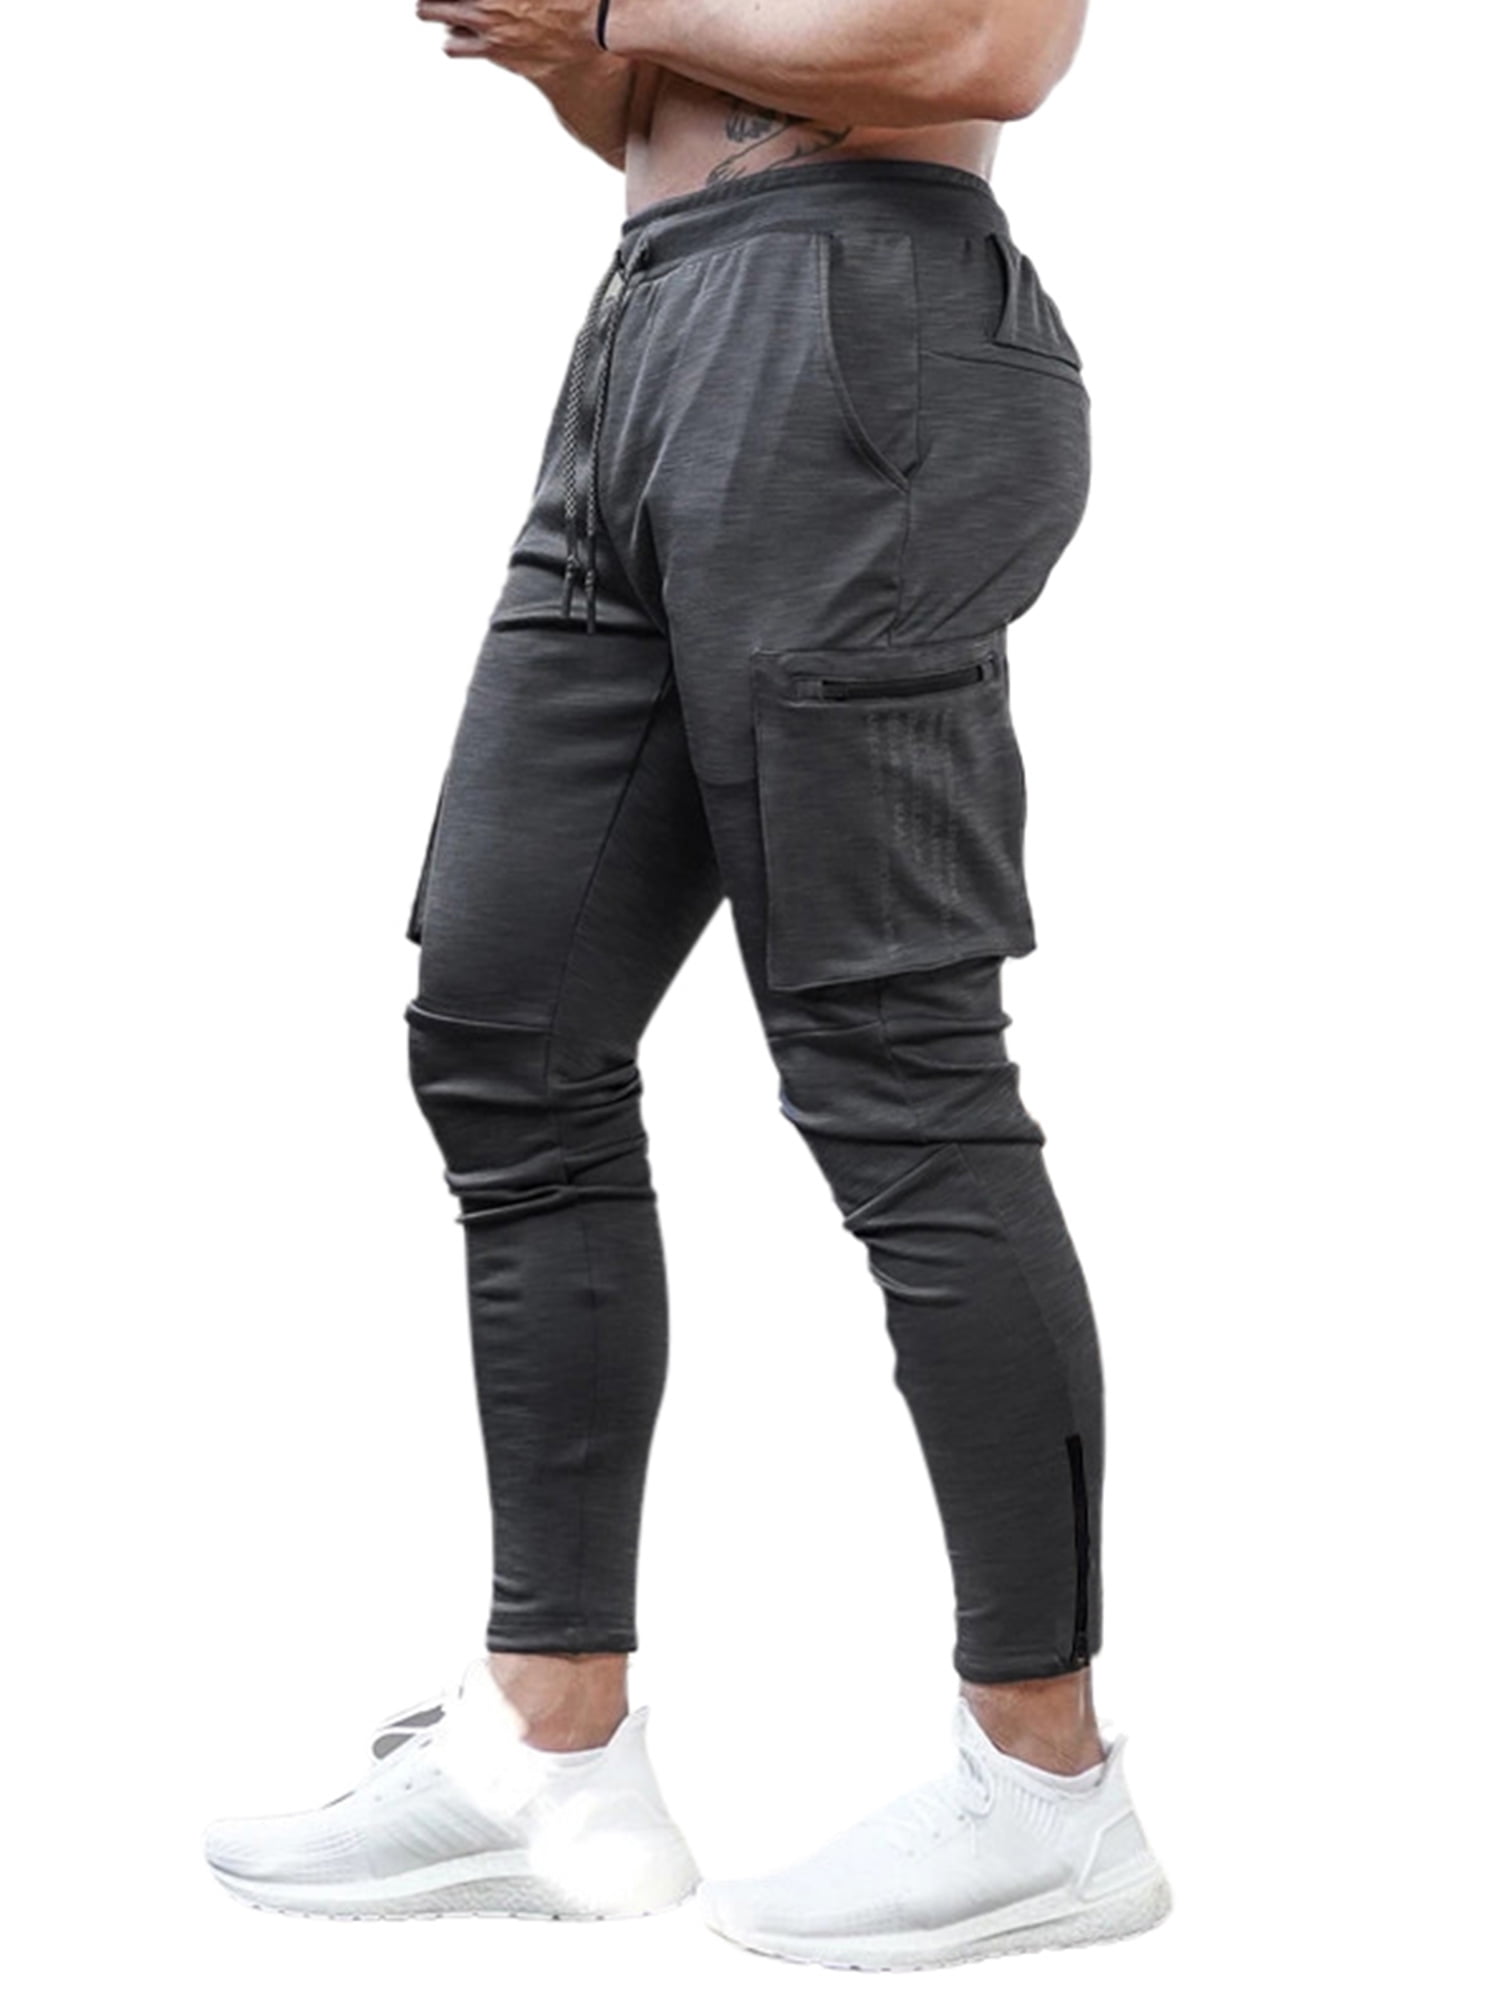 Mens Casual Workout Gym Running Sweatpants with Towel Loop Multi Pockets Bottoms 